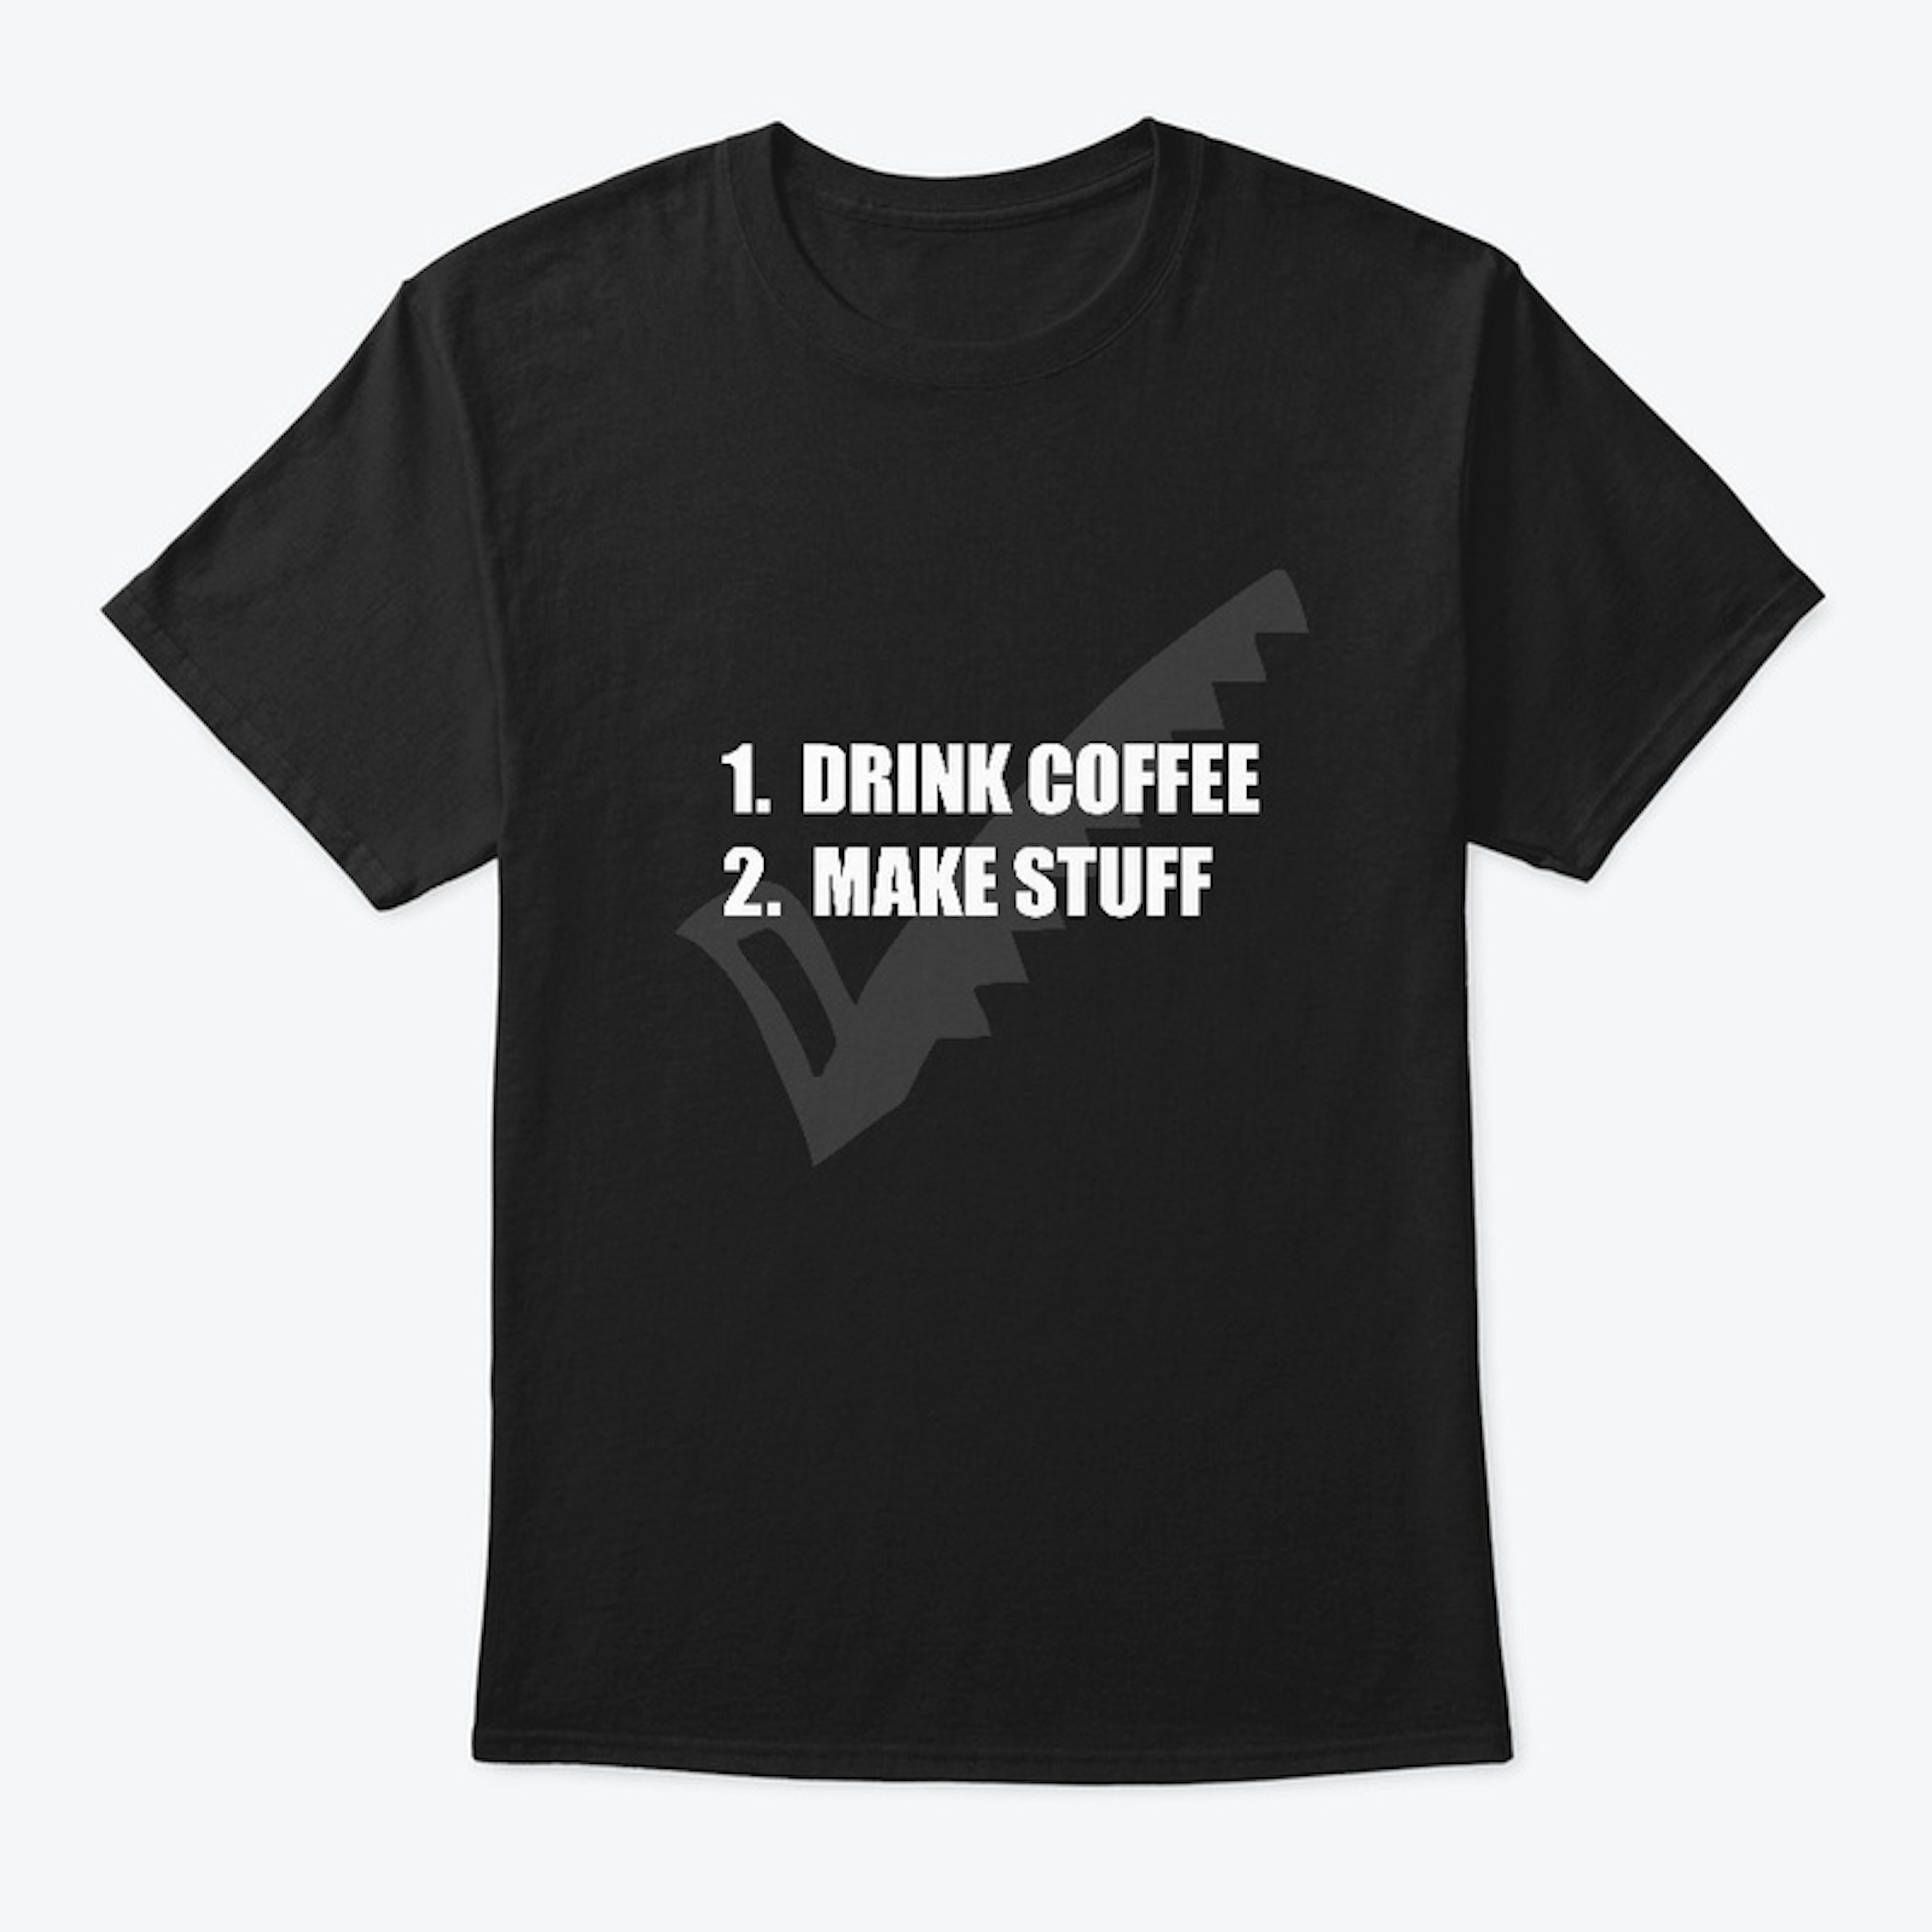 DRINK COFFEE MAKE STUFF OFFICIAL TOPS